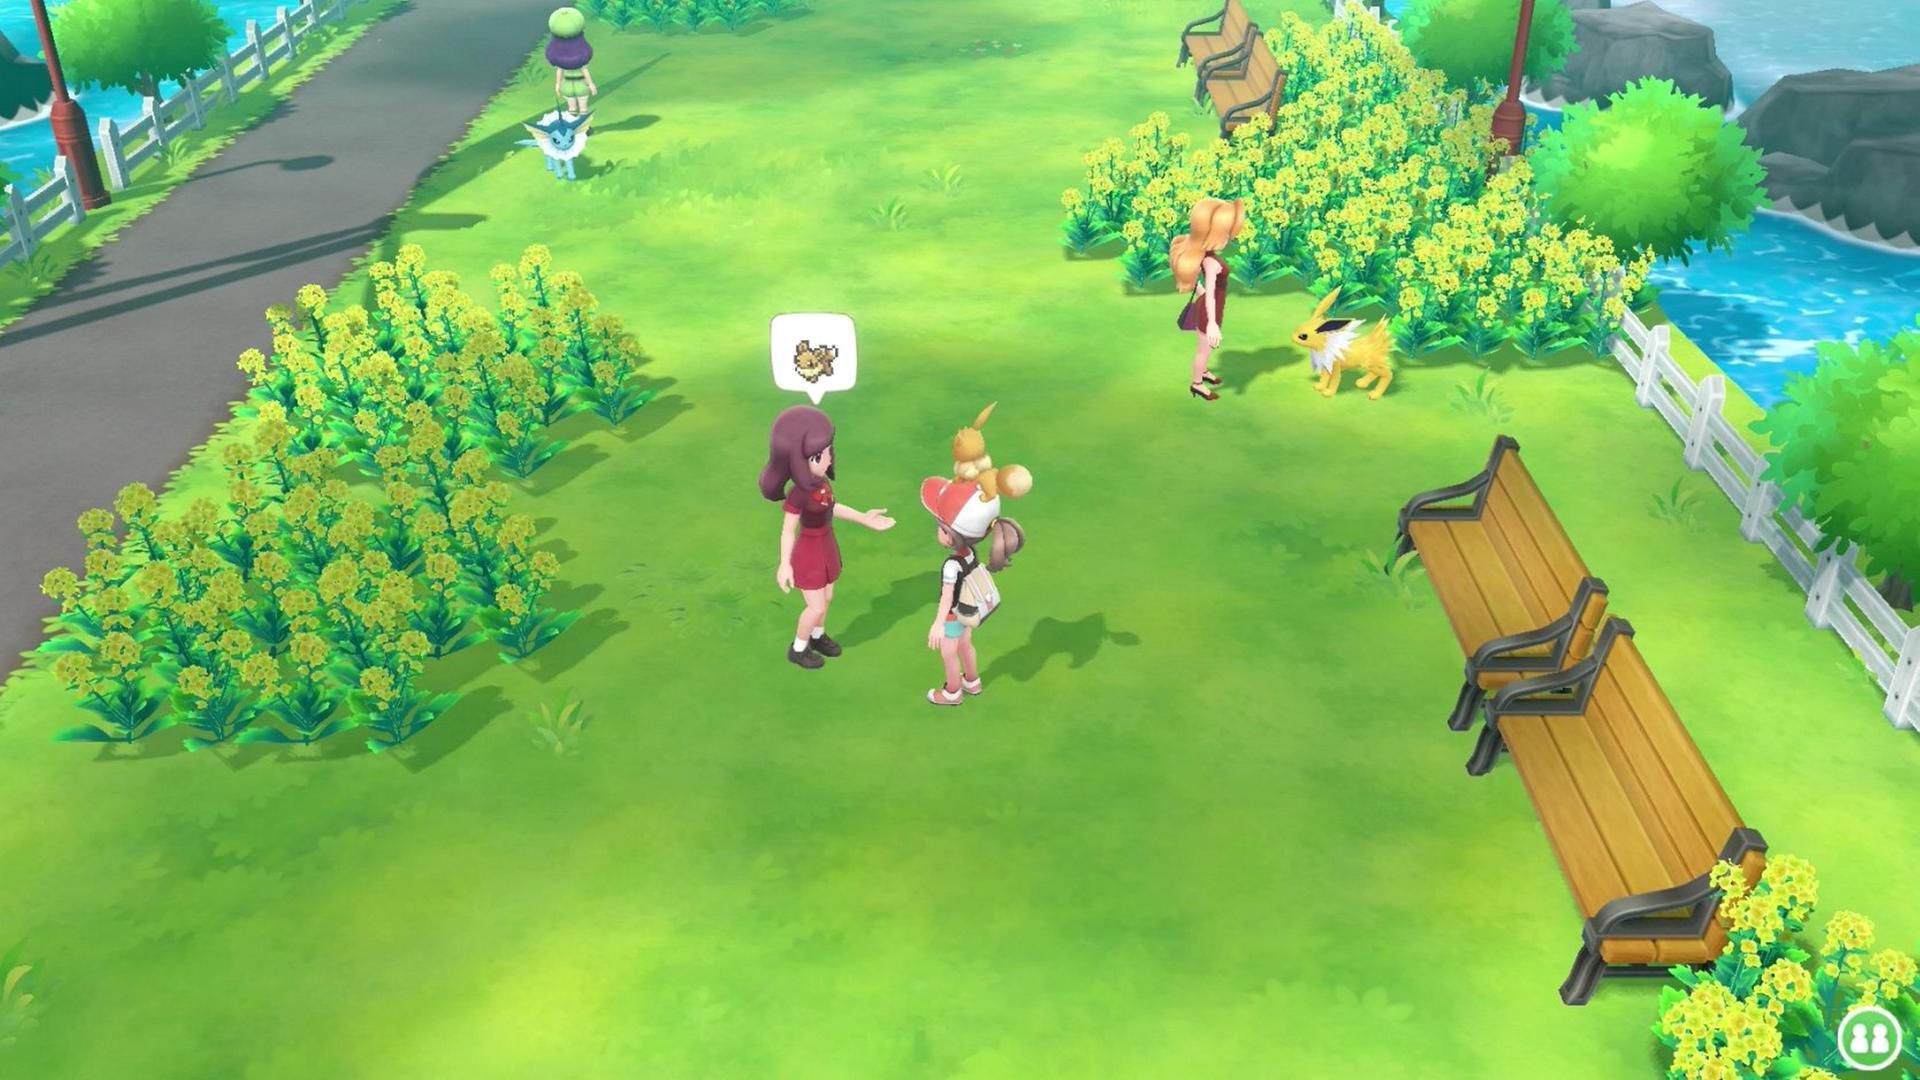 Pokémon: Let's Go, Pikachu vs. Eevee: Which version is better? - Polygon